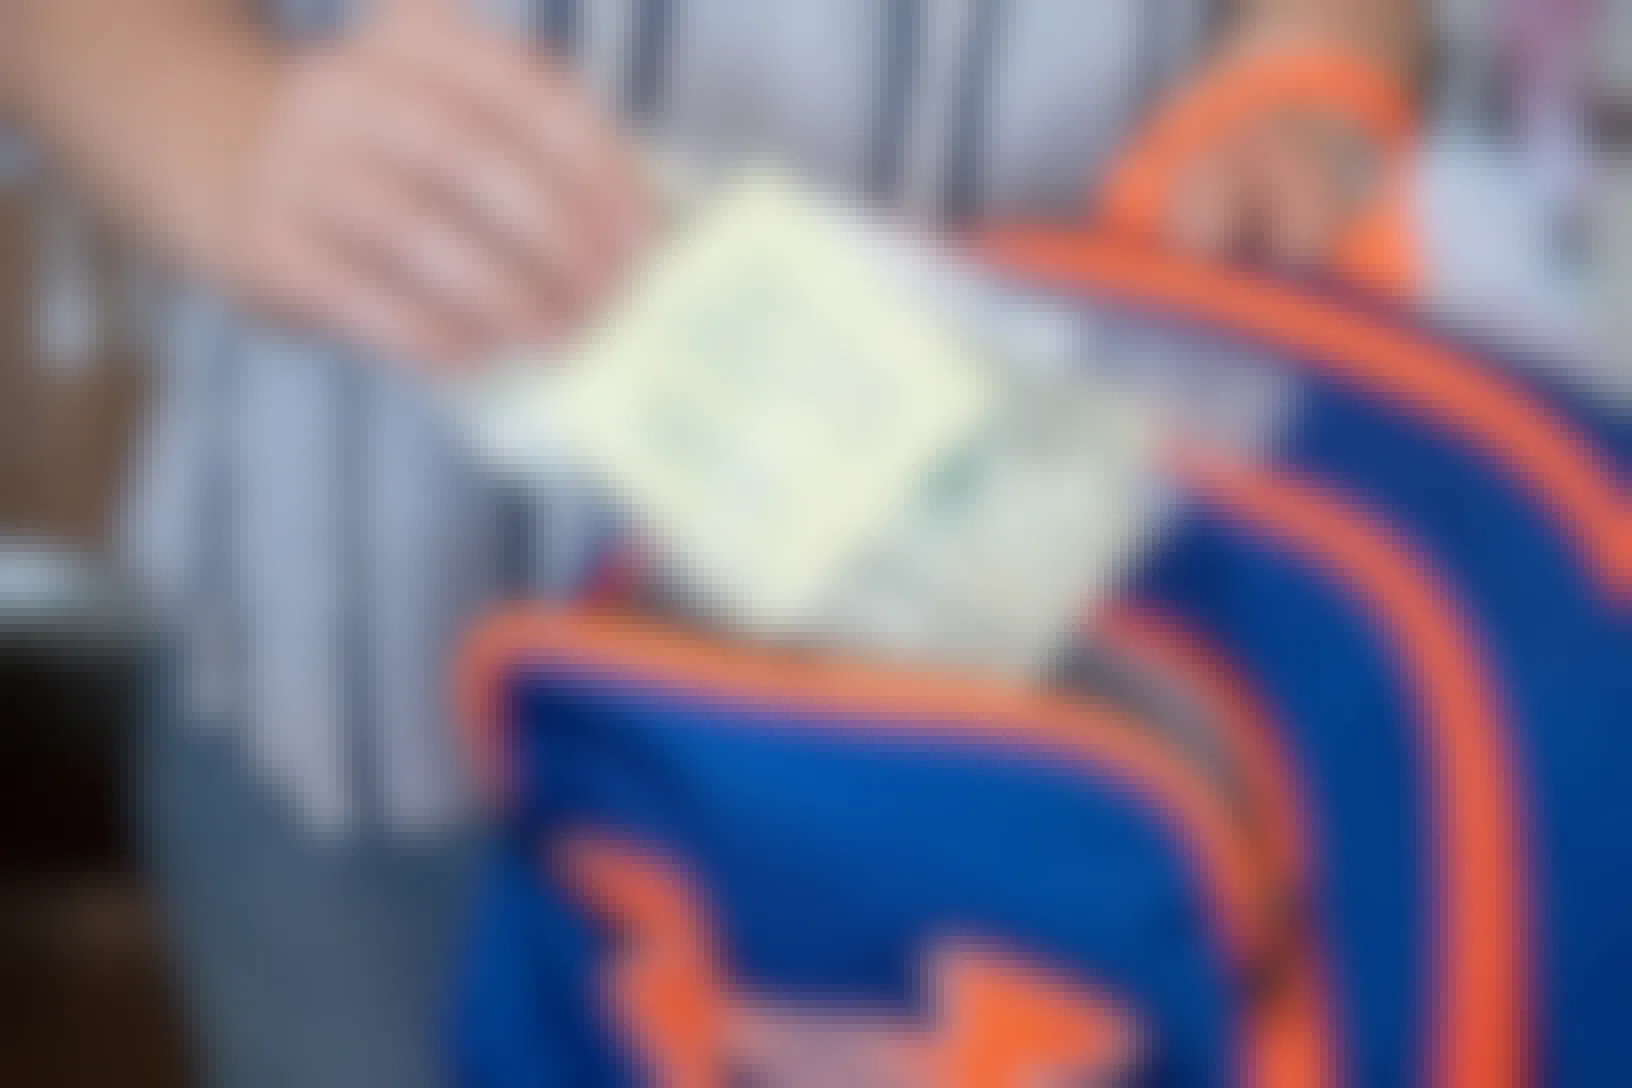 Woman placing a Ziploc bag with cash and note that reads "Lunch money to be paid to school. Deliver to front office. Love Mom" into a backpack.